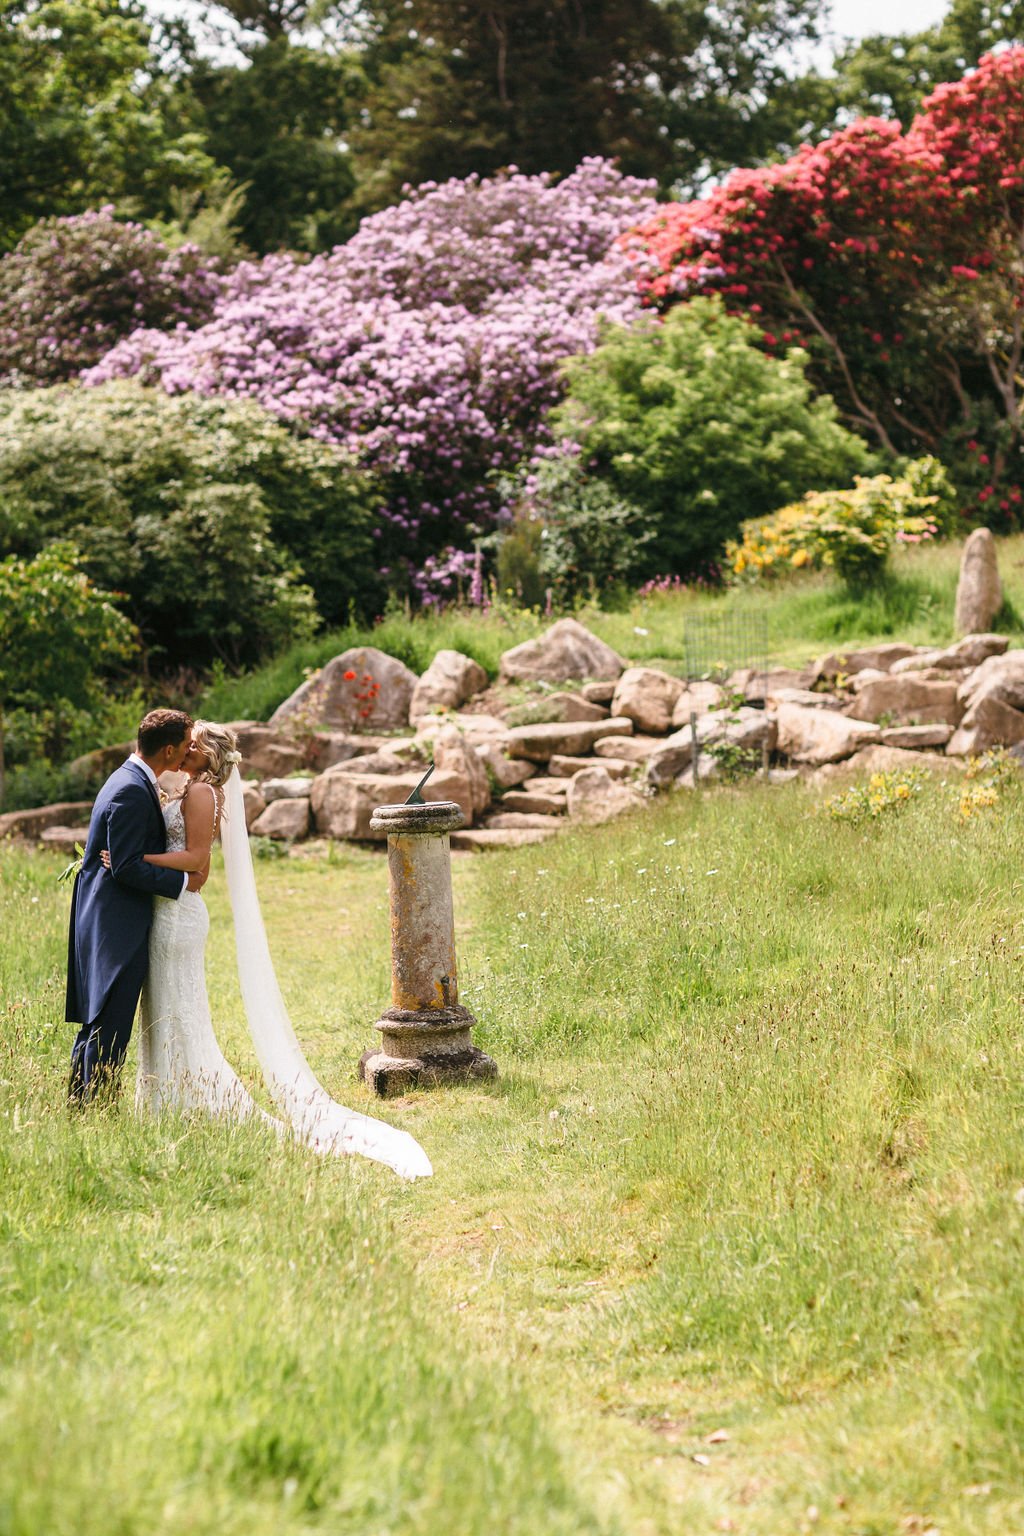 An intimate S]pring wedding in the American Gardens at Pentillie Castle in Cornwall by Freckle Photography.jpg